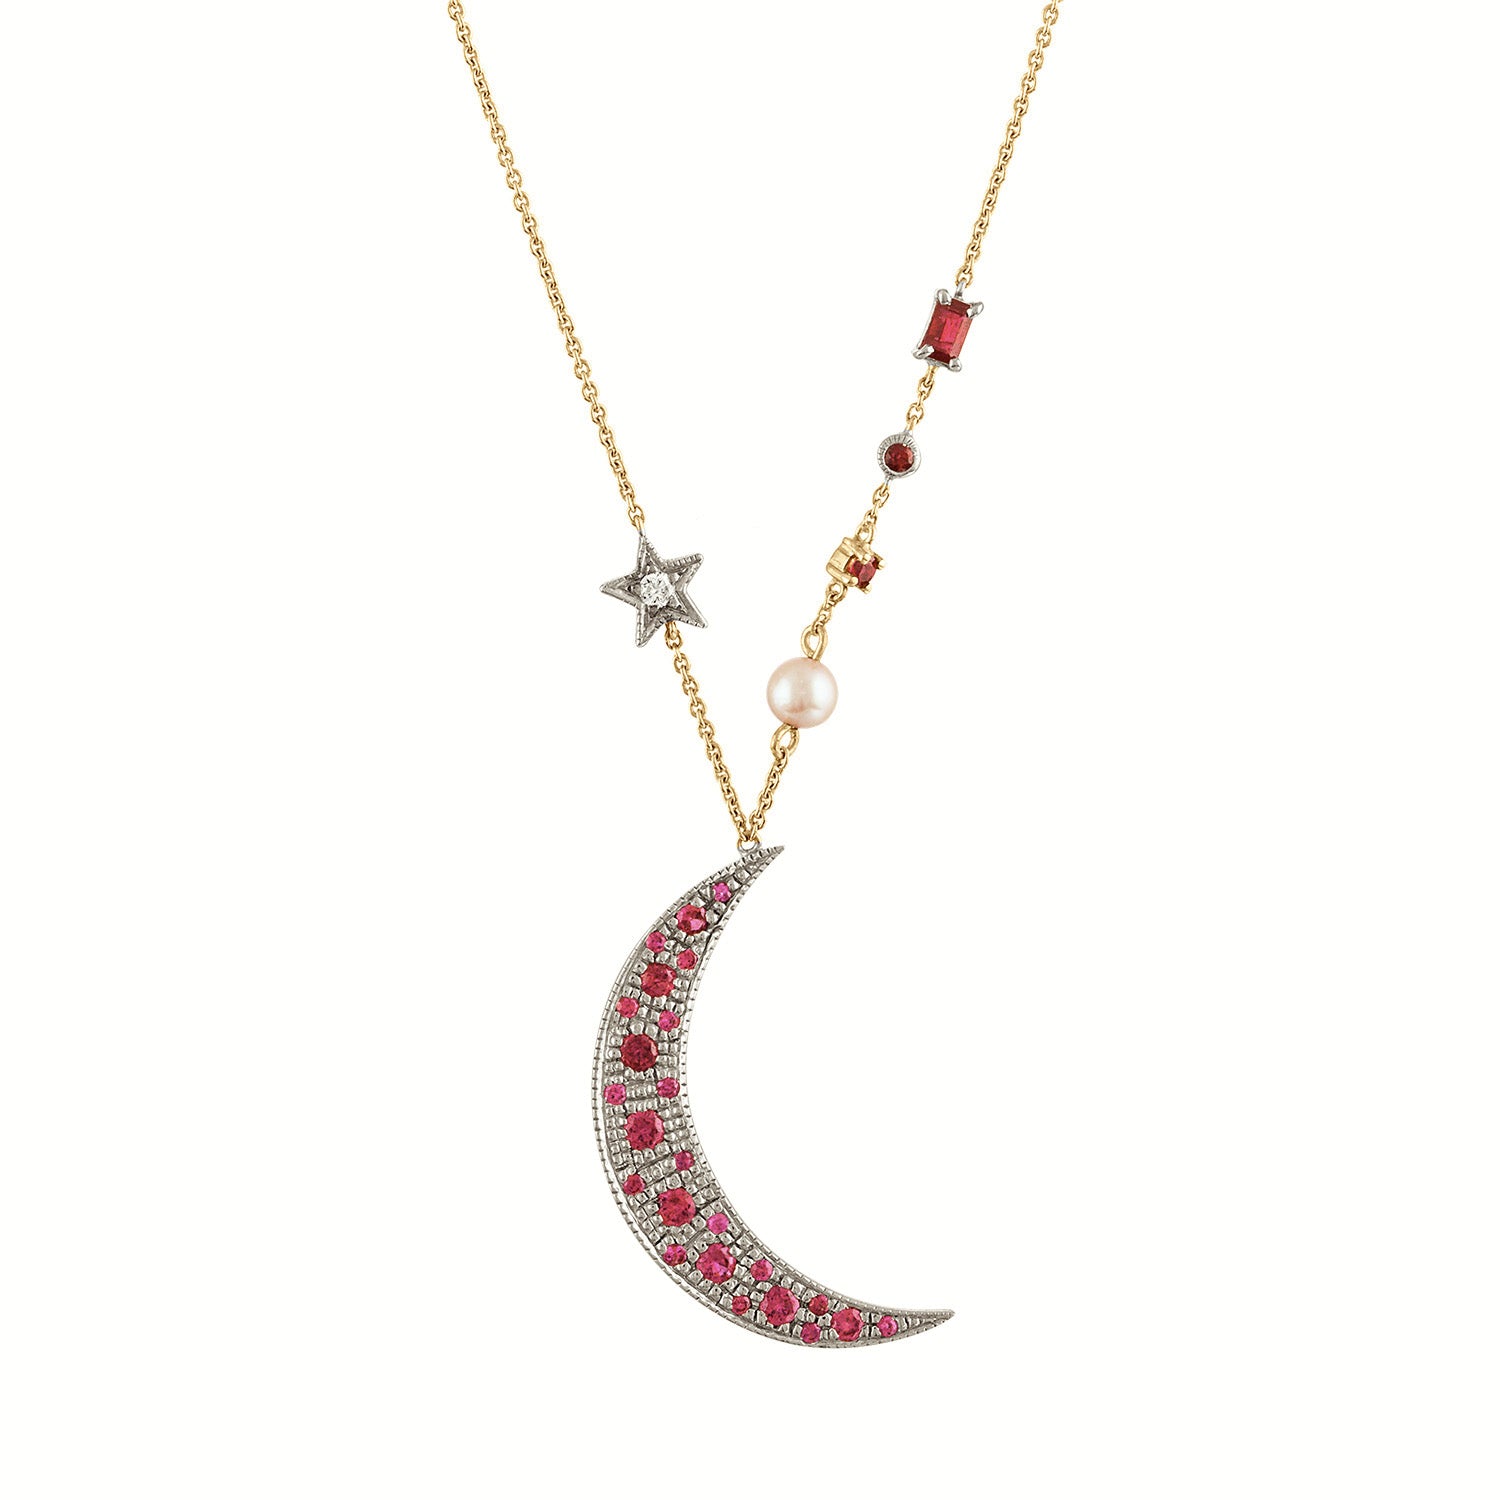 Ruby and Diamond "Bengal Moon" Necklace by Unhada